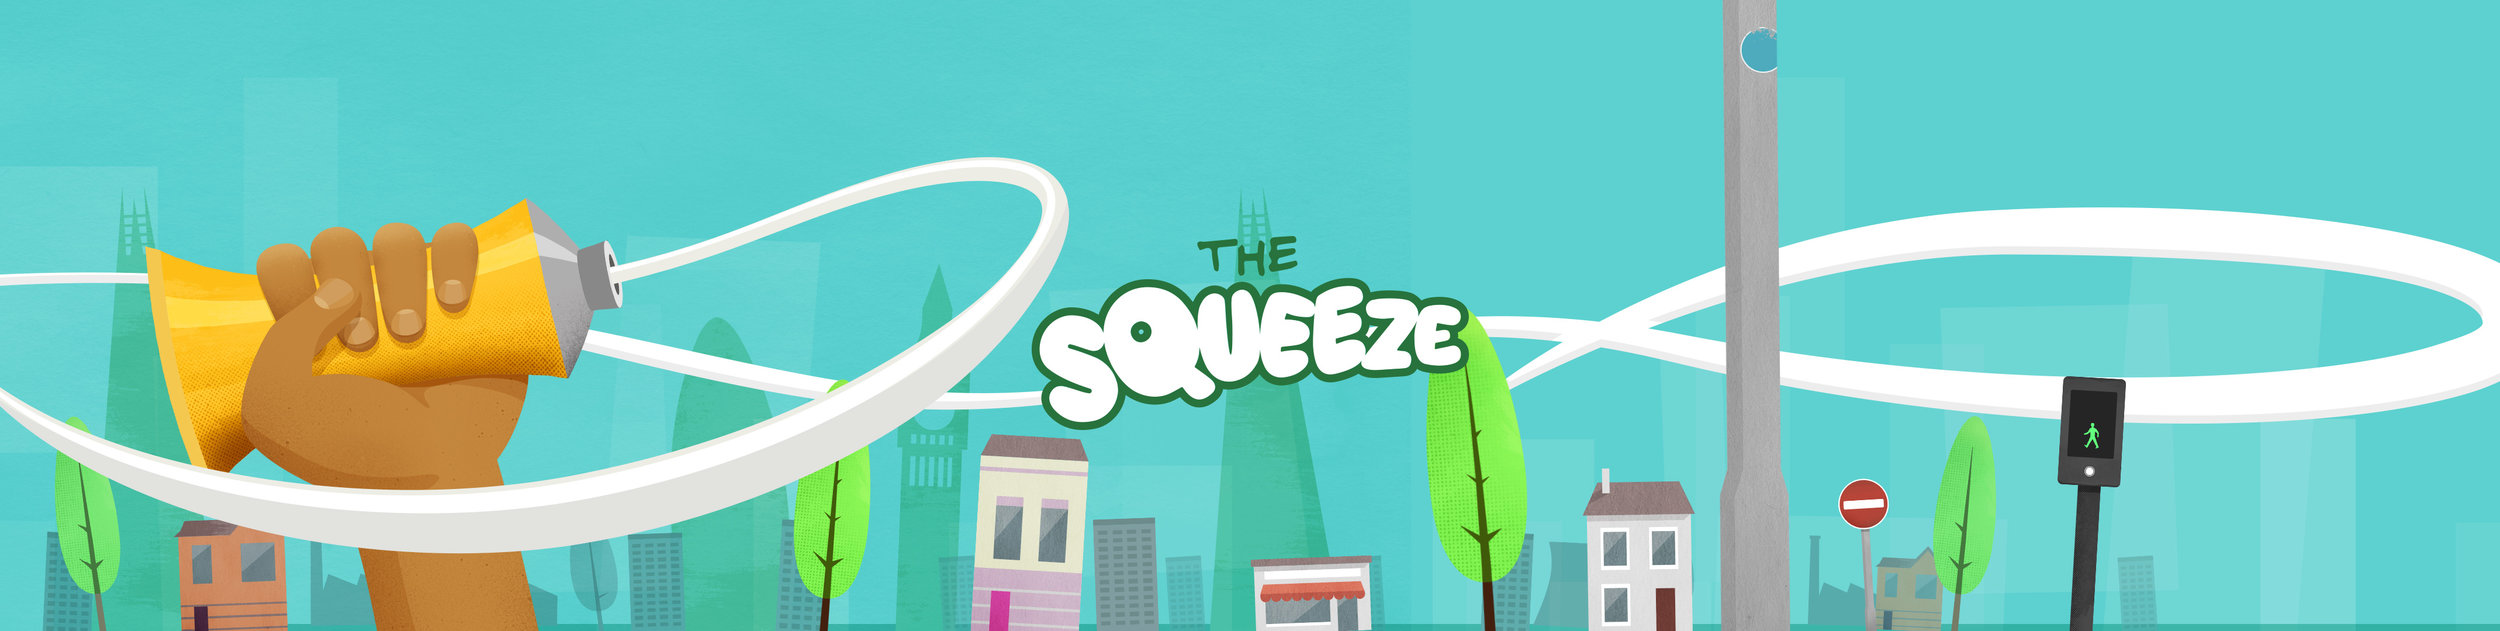 Squeeze-Styleframe-02e.jpg